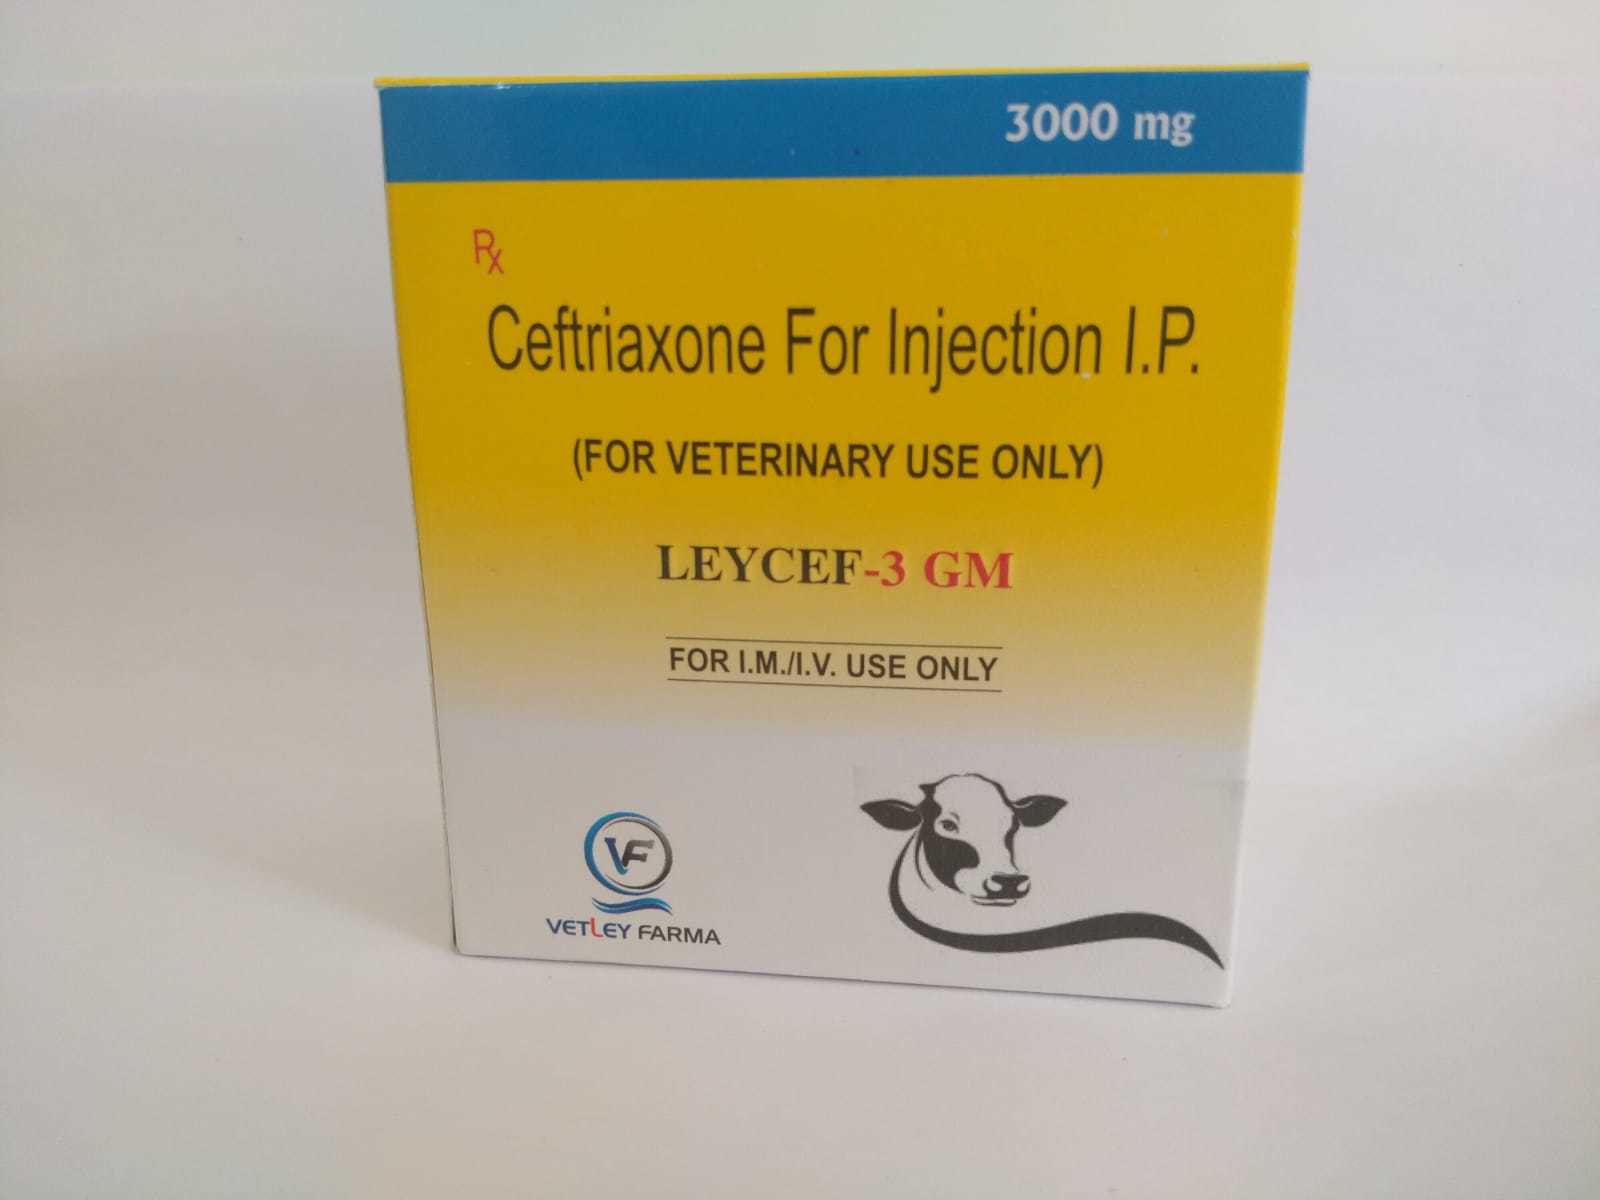 Ceftriaxone 3000 mg Injection In Pcd Farnchise